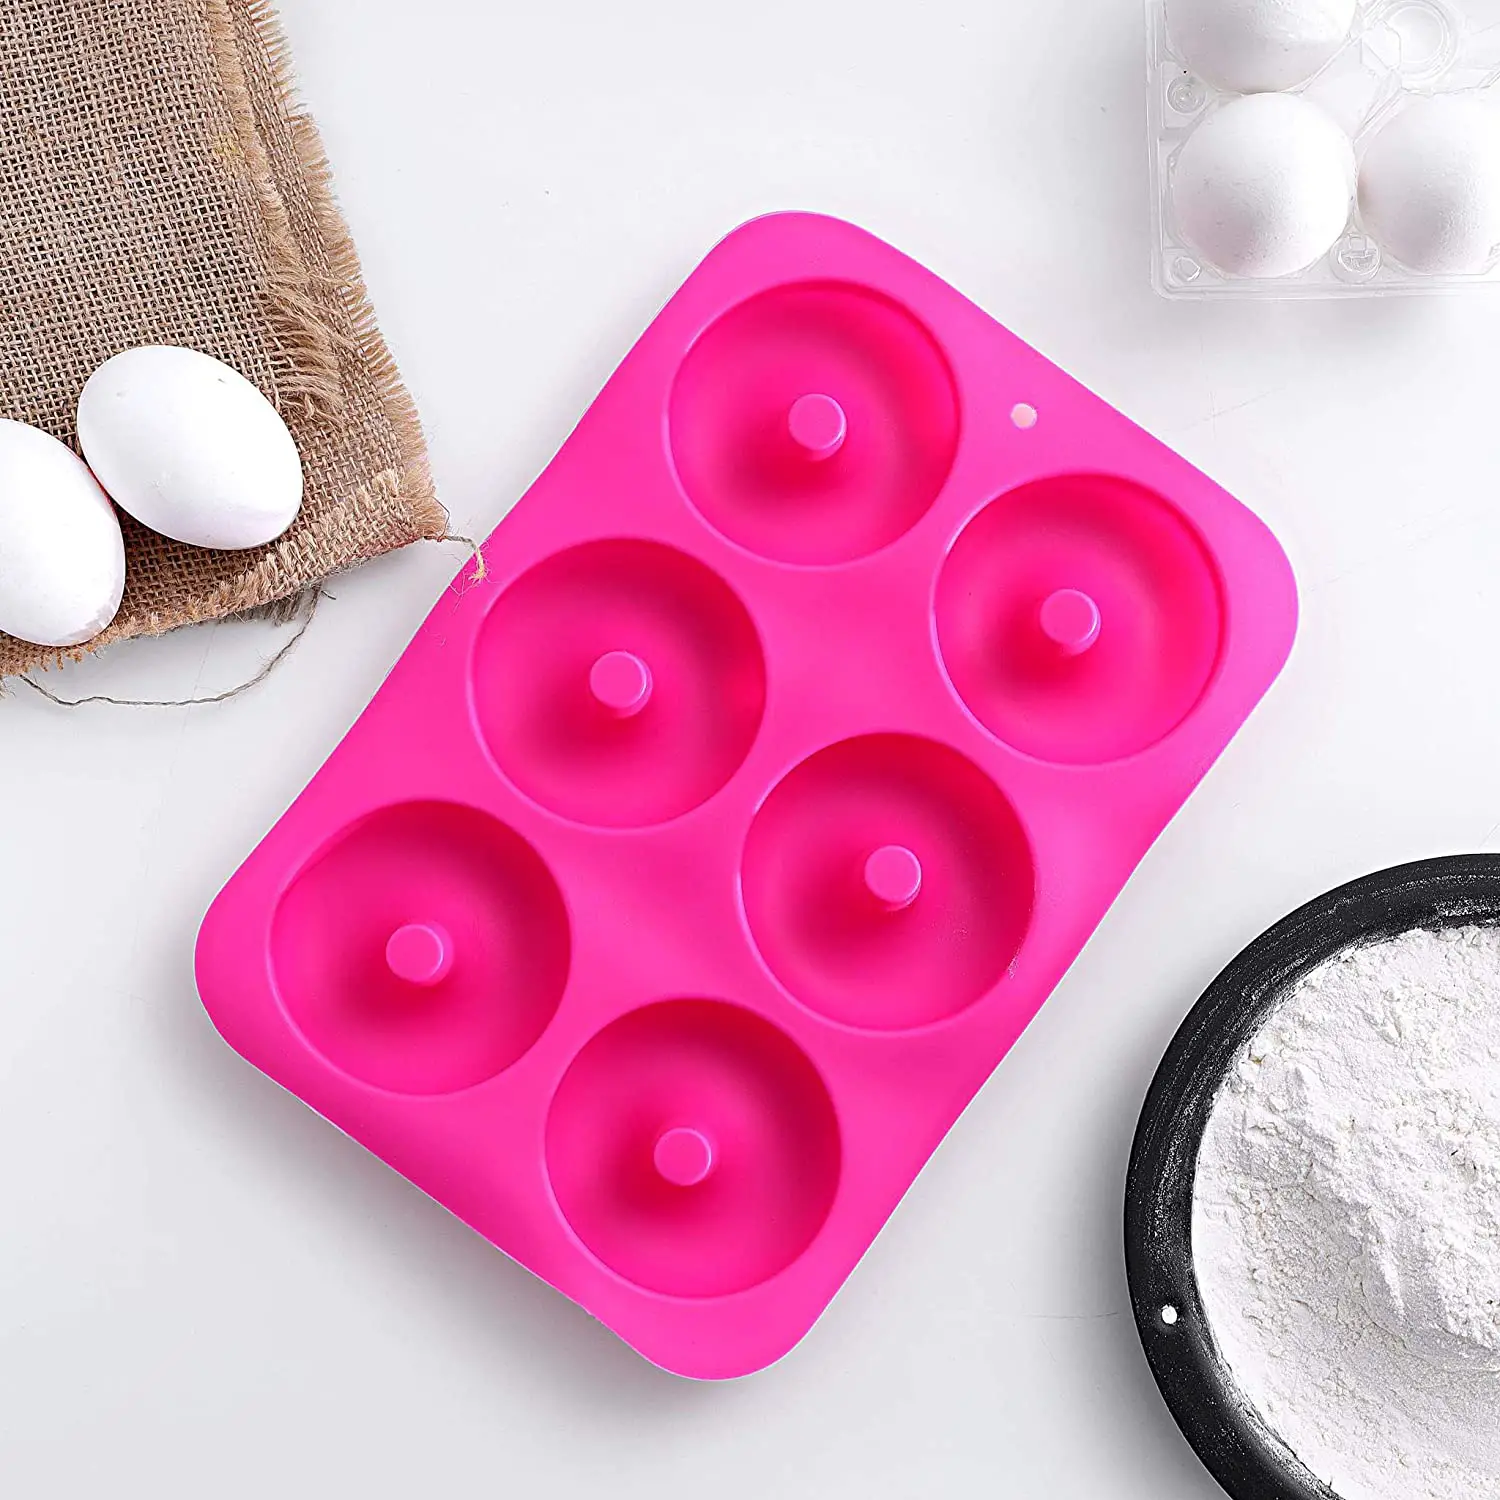 Silicone Donut Mold with 6 Cavities